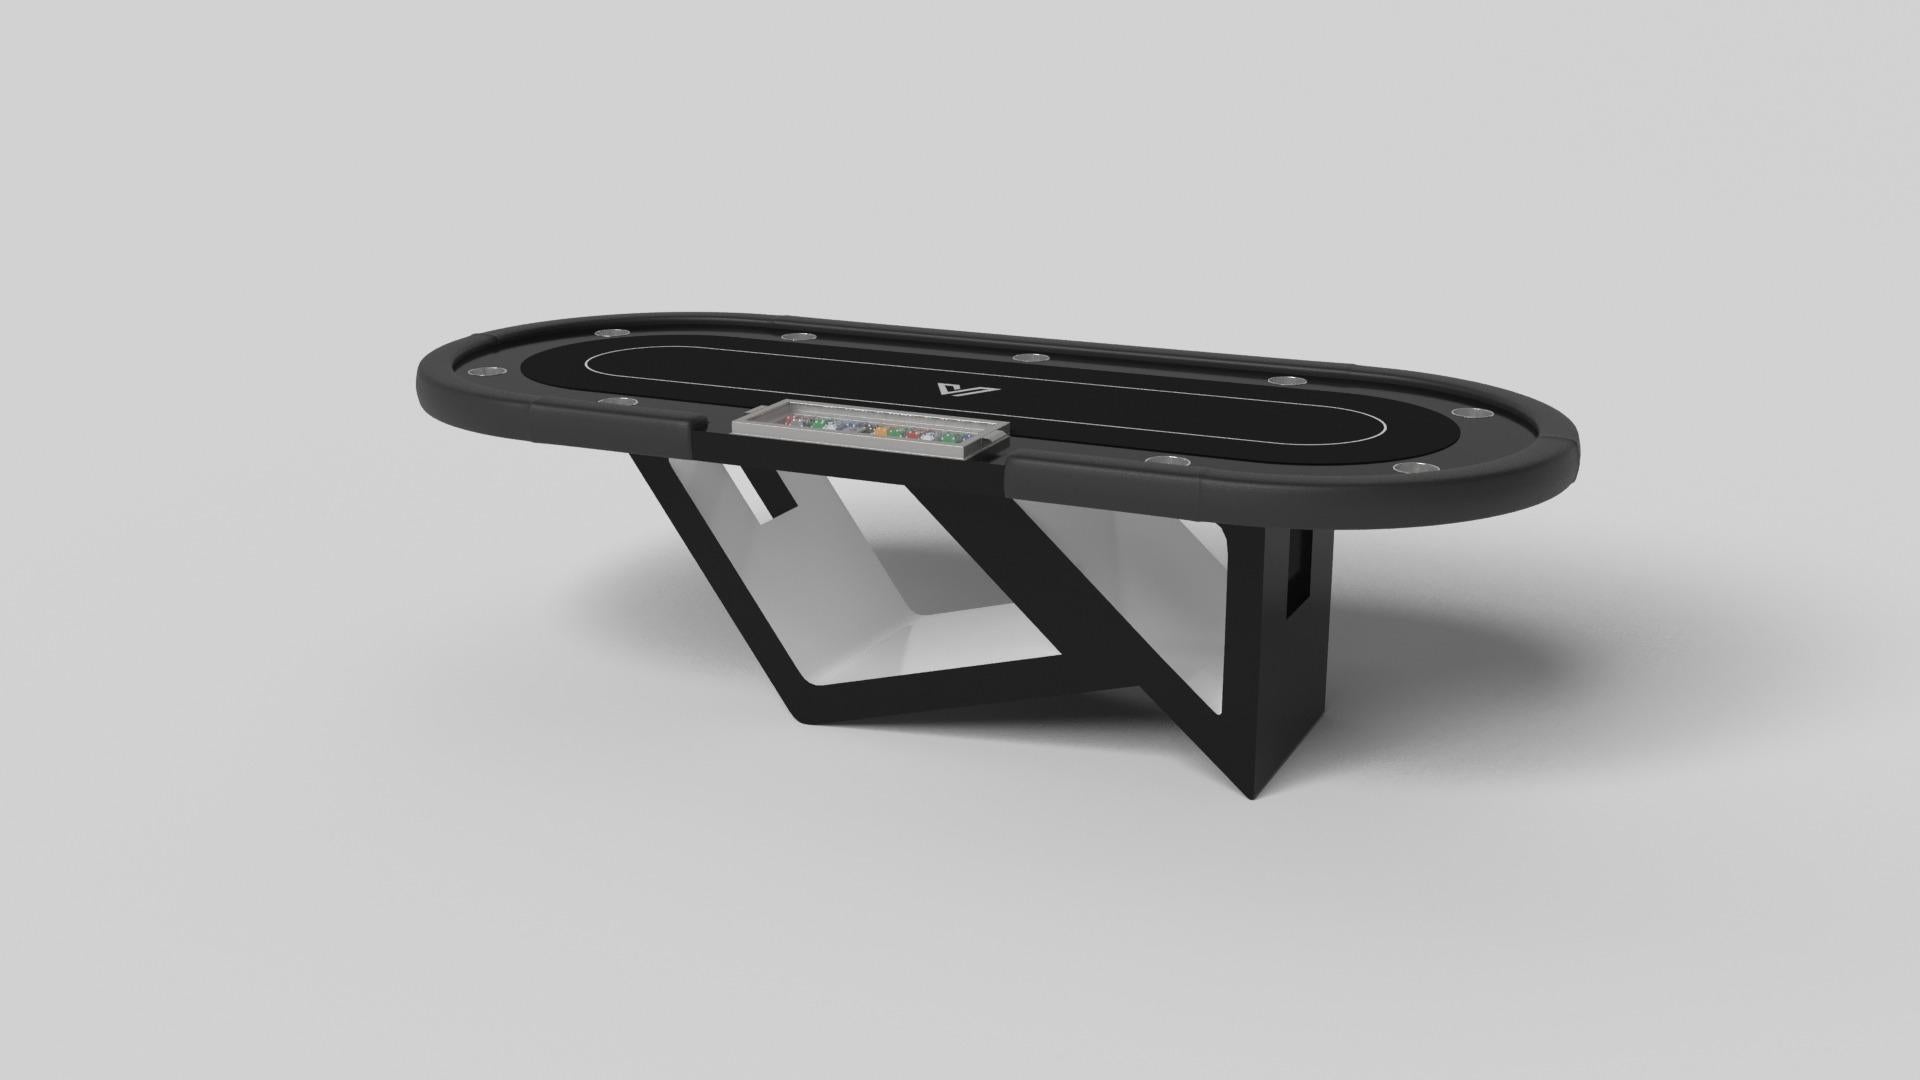 Drawing inspiration from the beauty of geometric forms, the Rumba poker table in brushed aluminum is characterized by a series of hollow and solid shapes that form an offset asymmetric base. Accented with a rounded top for professional game play,